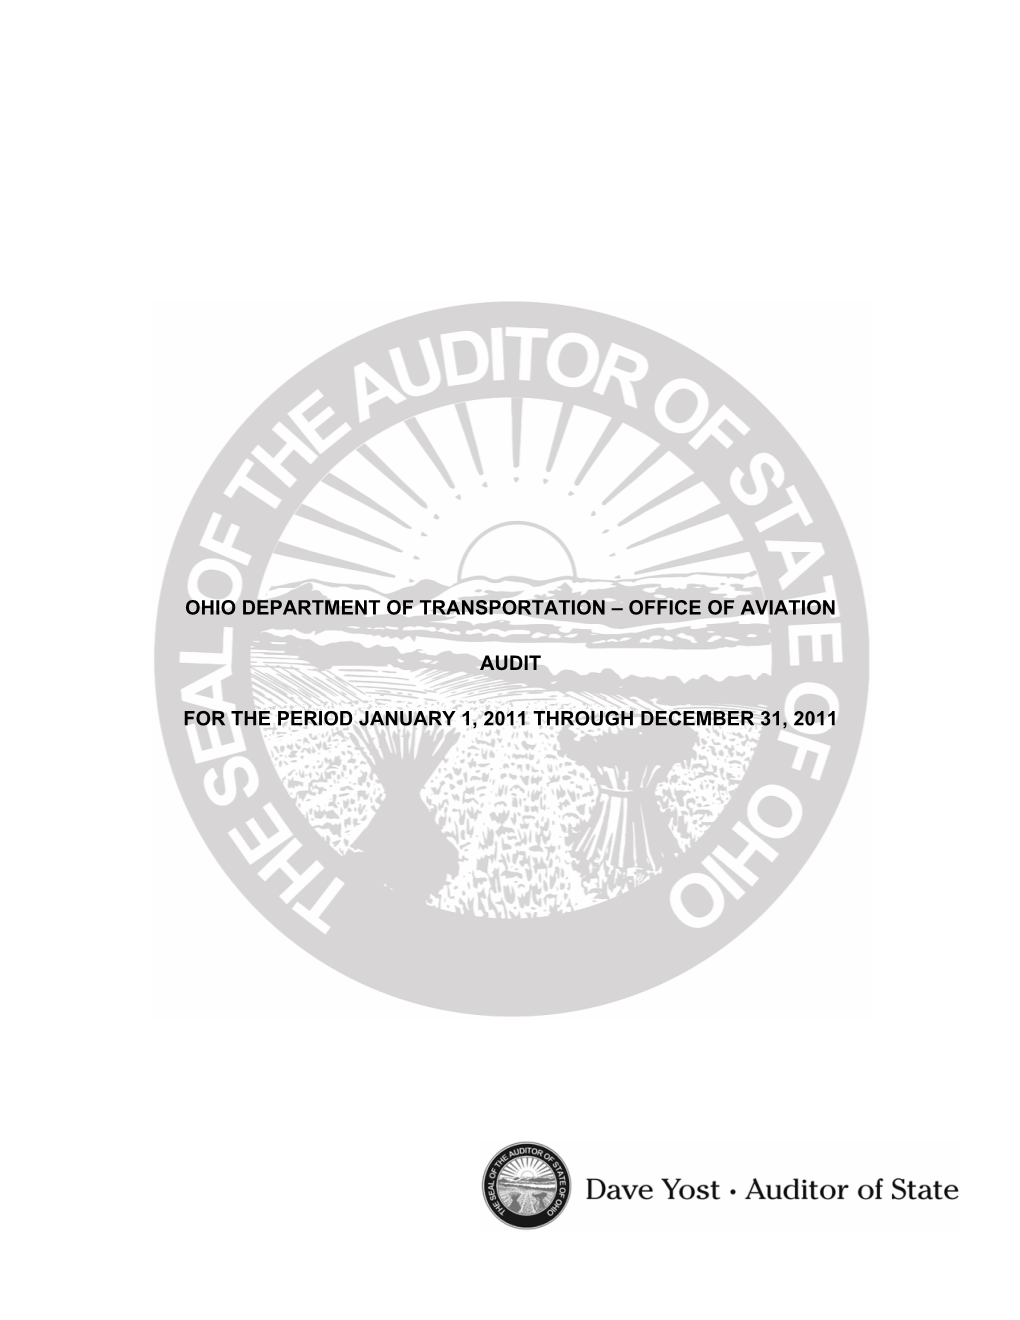 Ohio Department of Transportation – Office of Aviation Audit for the Period